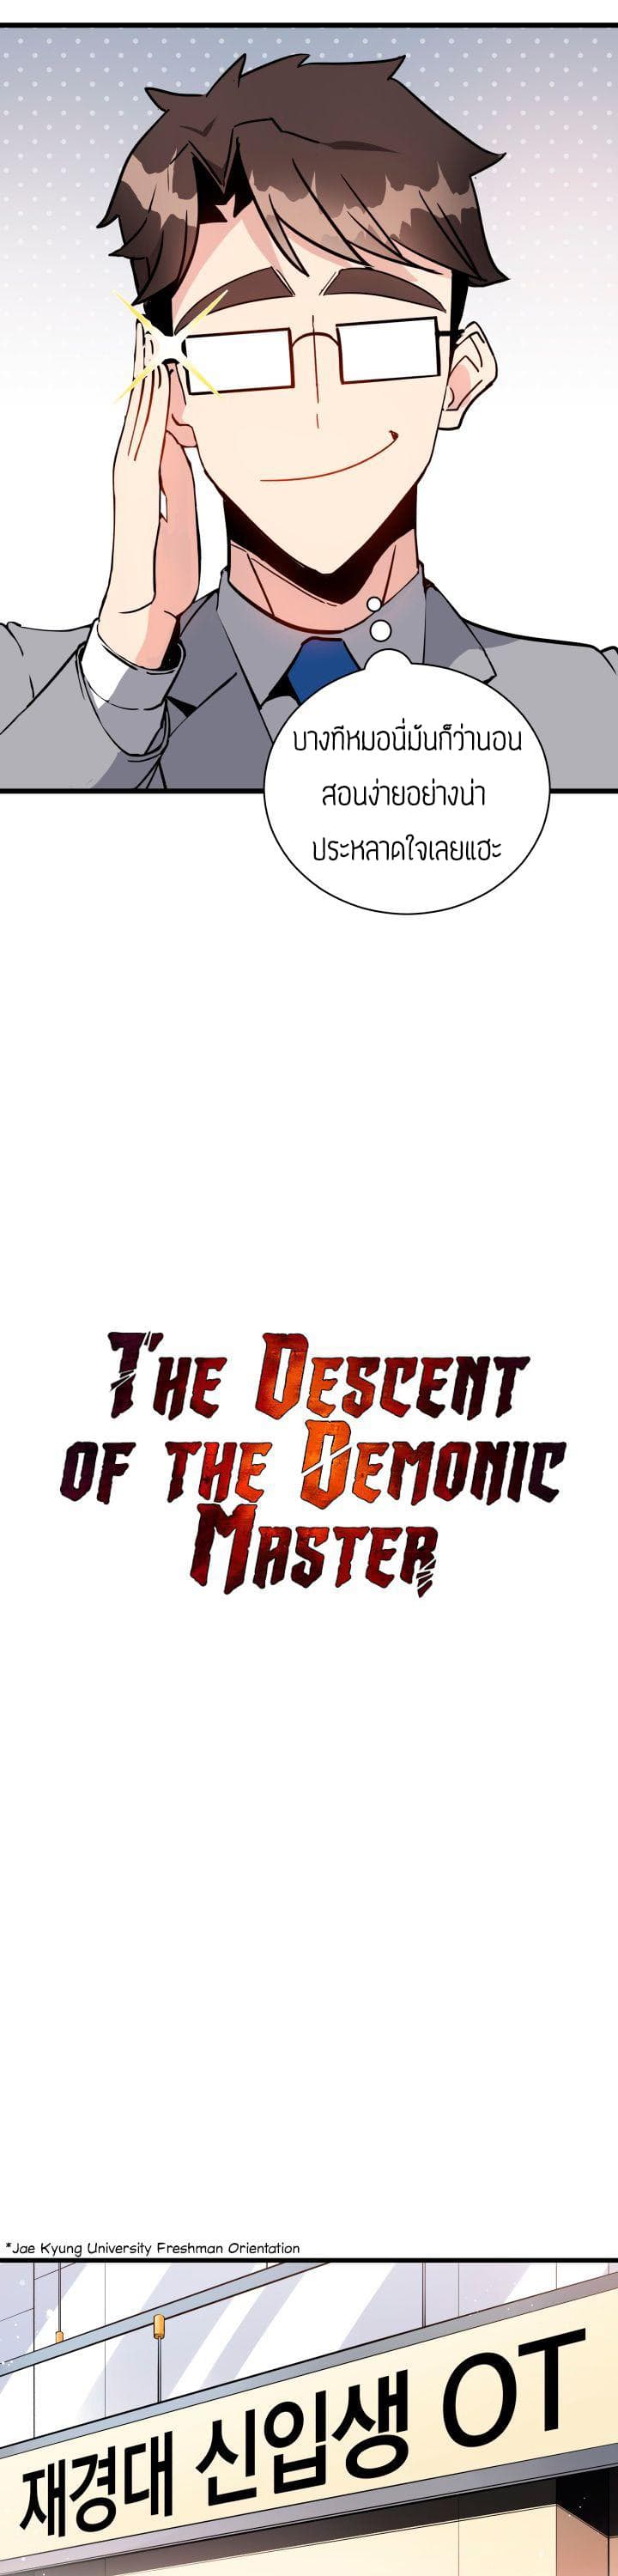 The Descent of the Demonic Master35 (8)